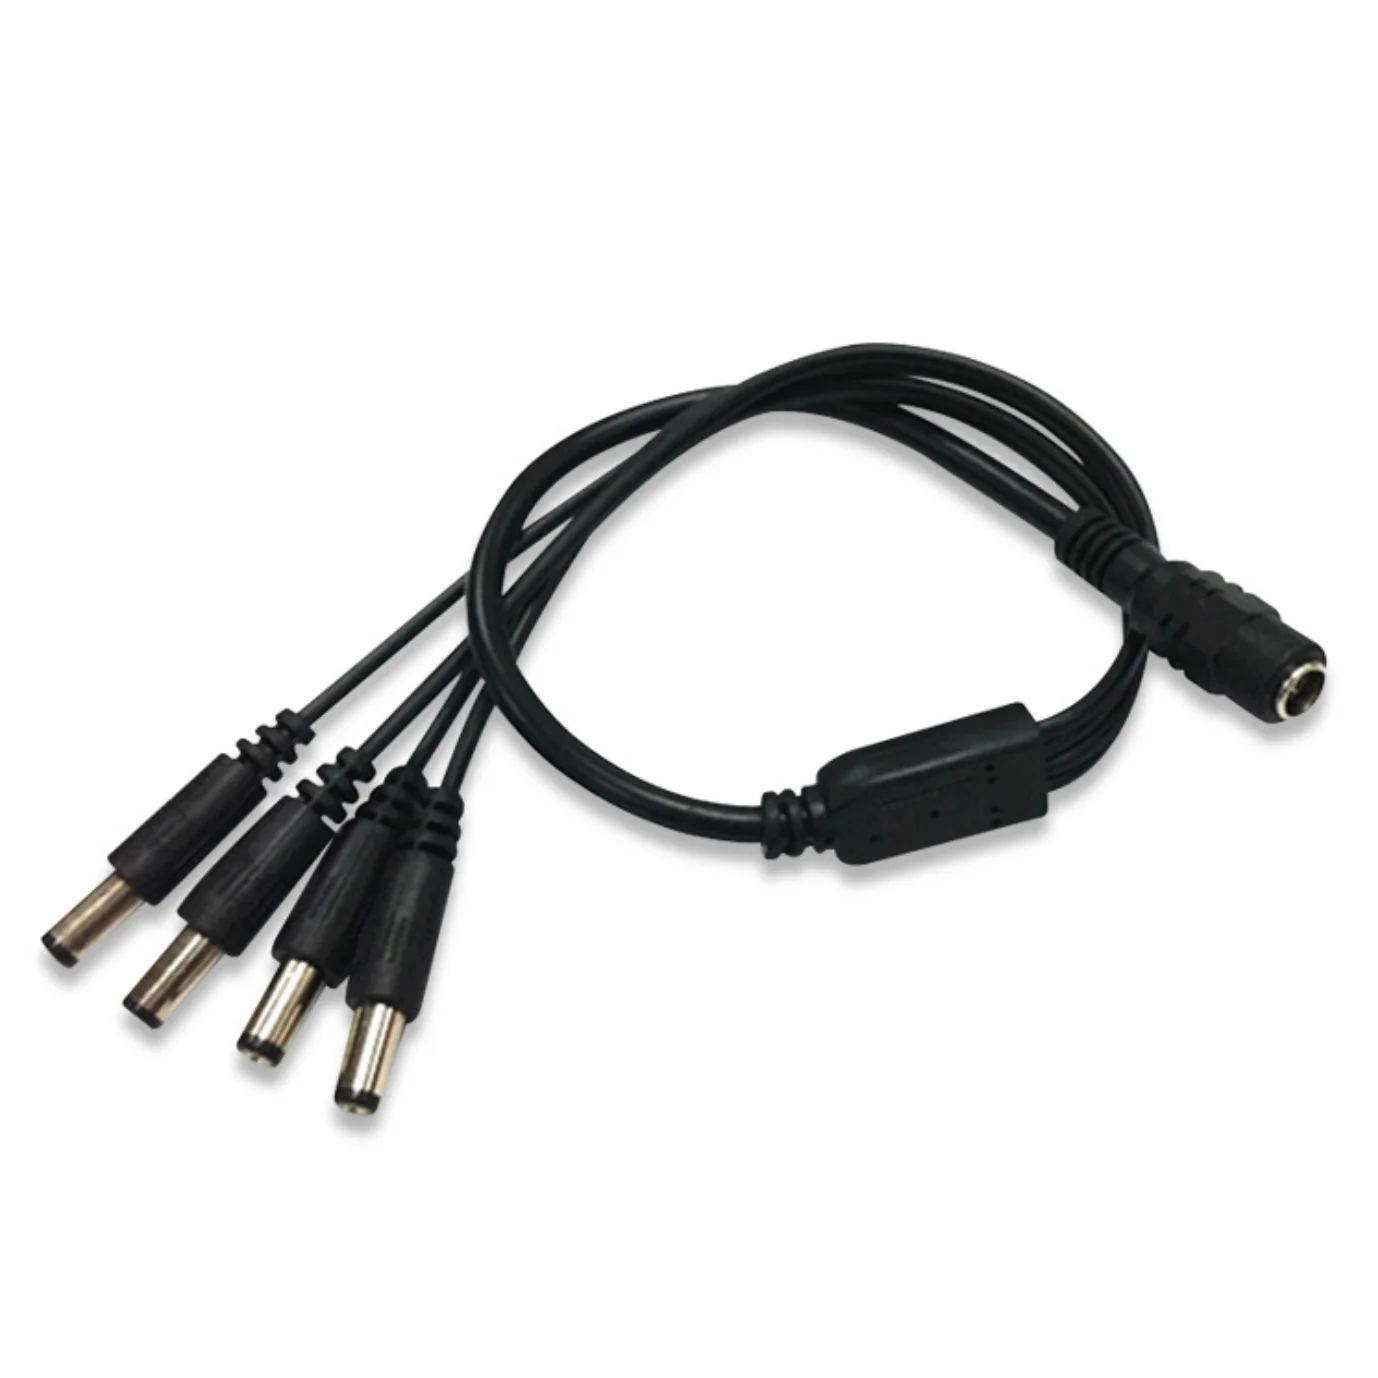 

20pcs lot, 1 in 4 output DC Splitter, UL Approval cable/cords, 5.5x2.1mm